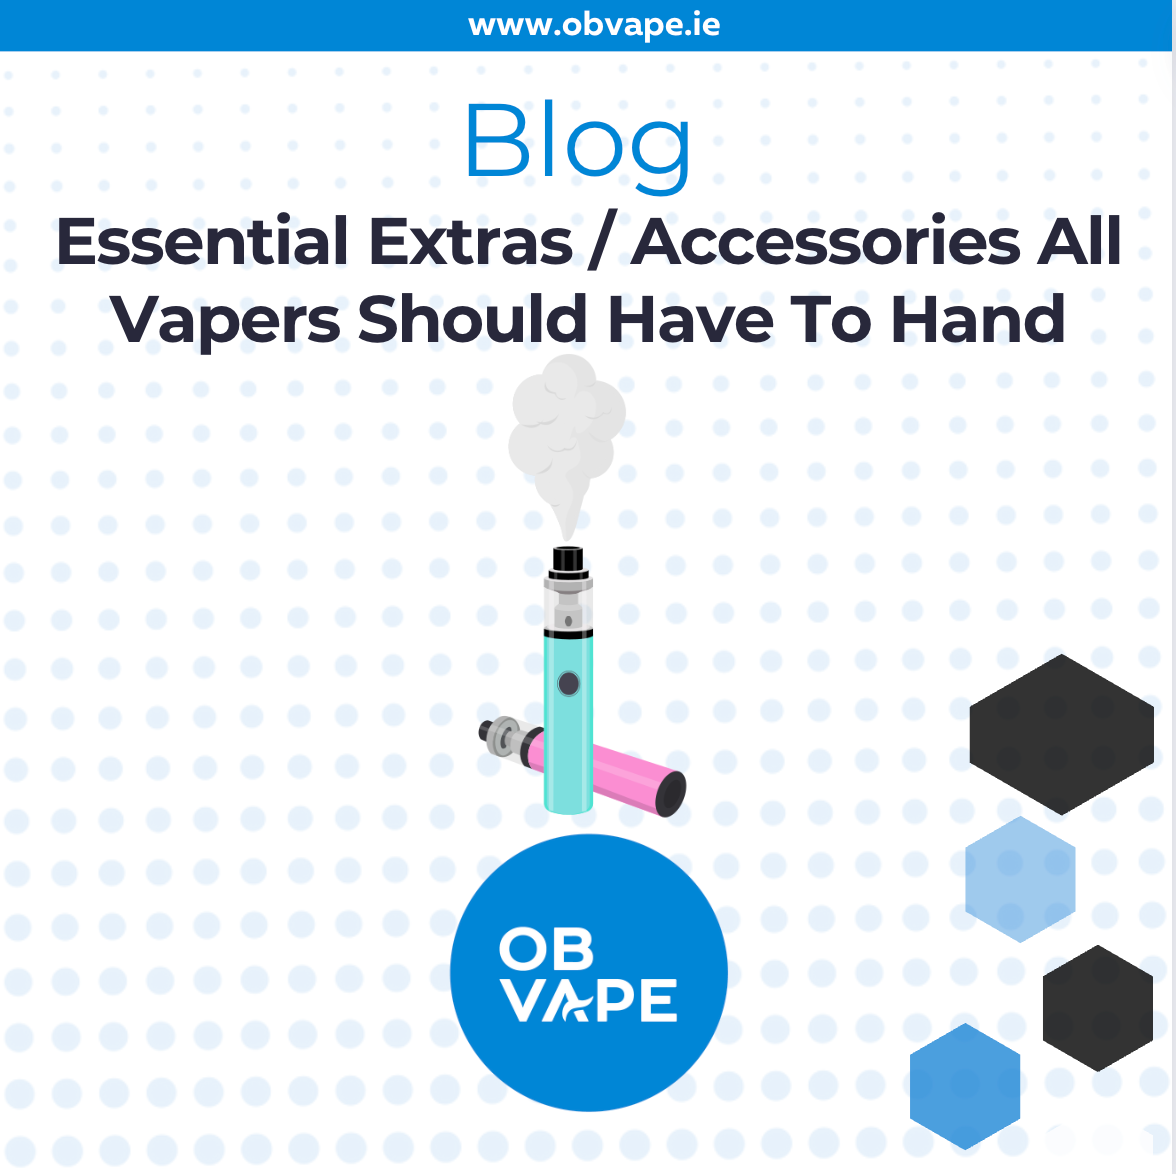 Essential Extras / Accessories All Vapers Should Have To Hand